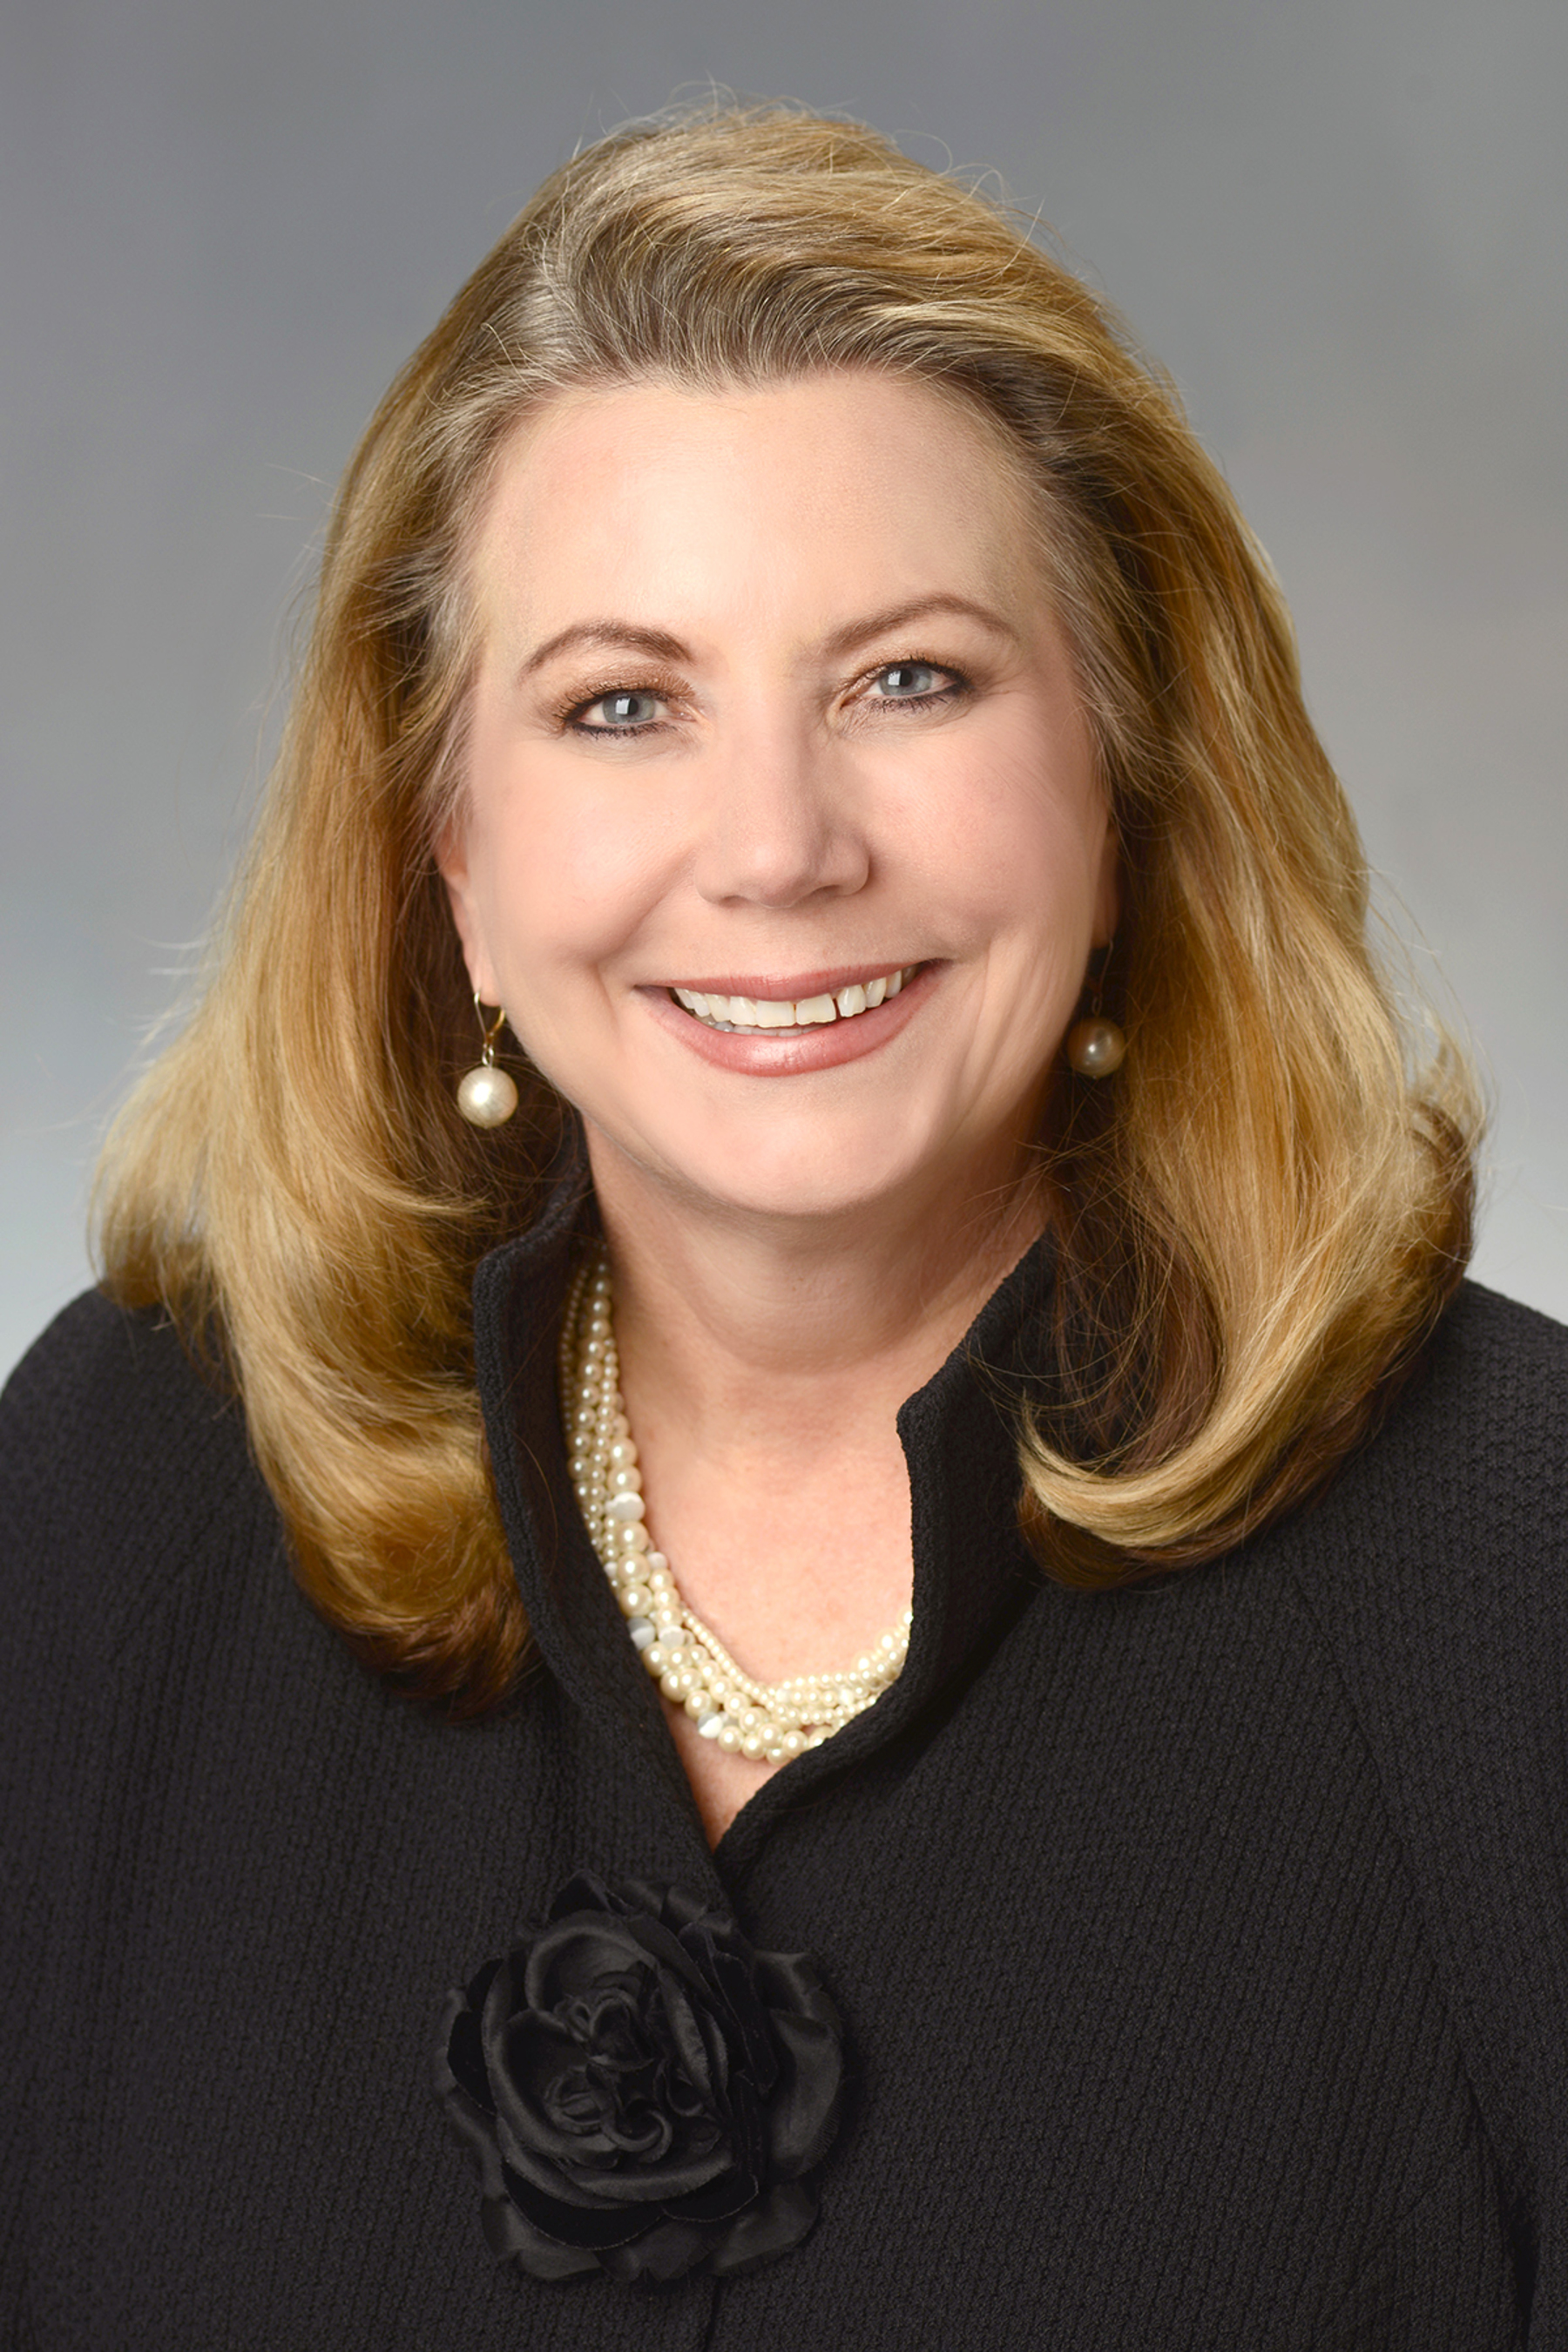 Tami M. Barron named president of Southern Company subsidiary SouthernLINC Wireless